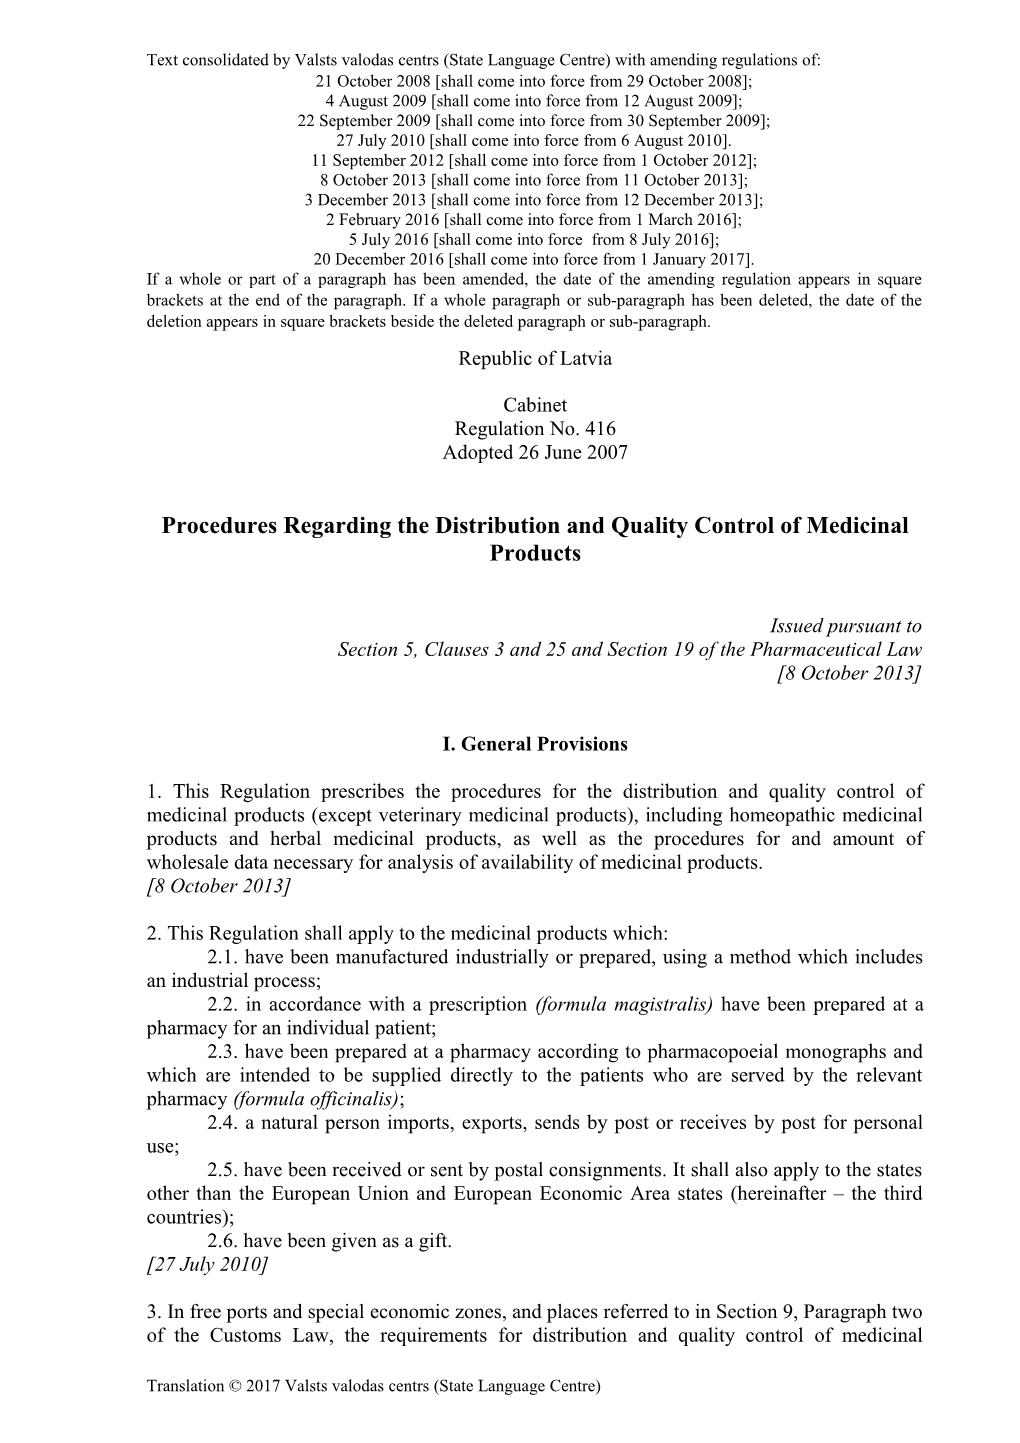 Procedures Regarding the Distribution and Quality Control of Medicinal Products